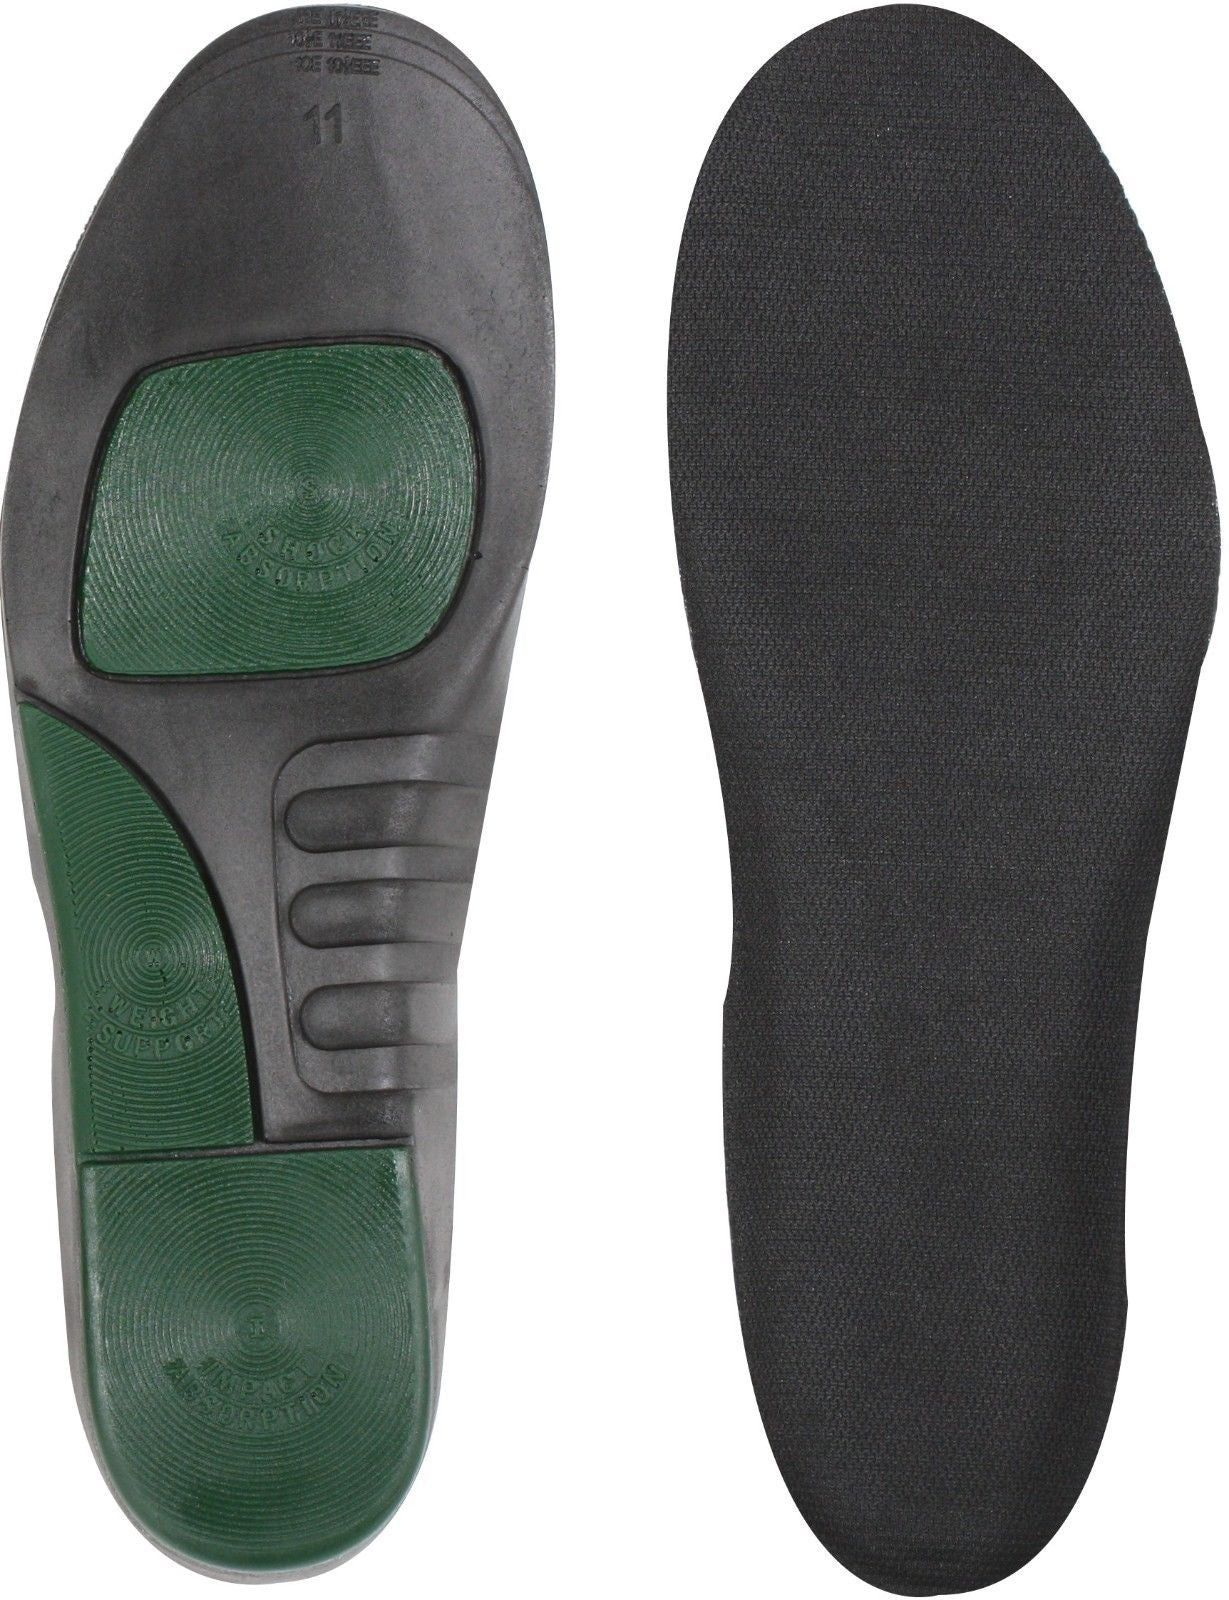 Shoe Insoles - Black Public Boot Saftey Contoured In Soles -All Sizes